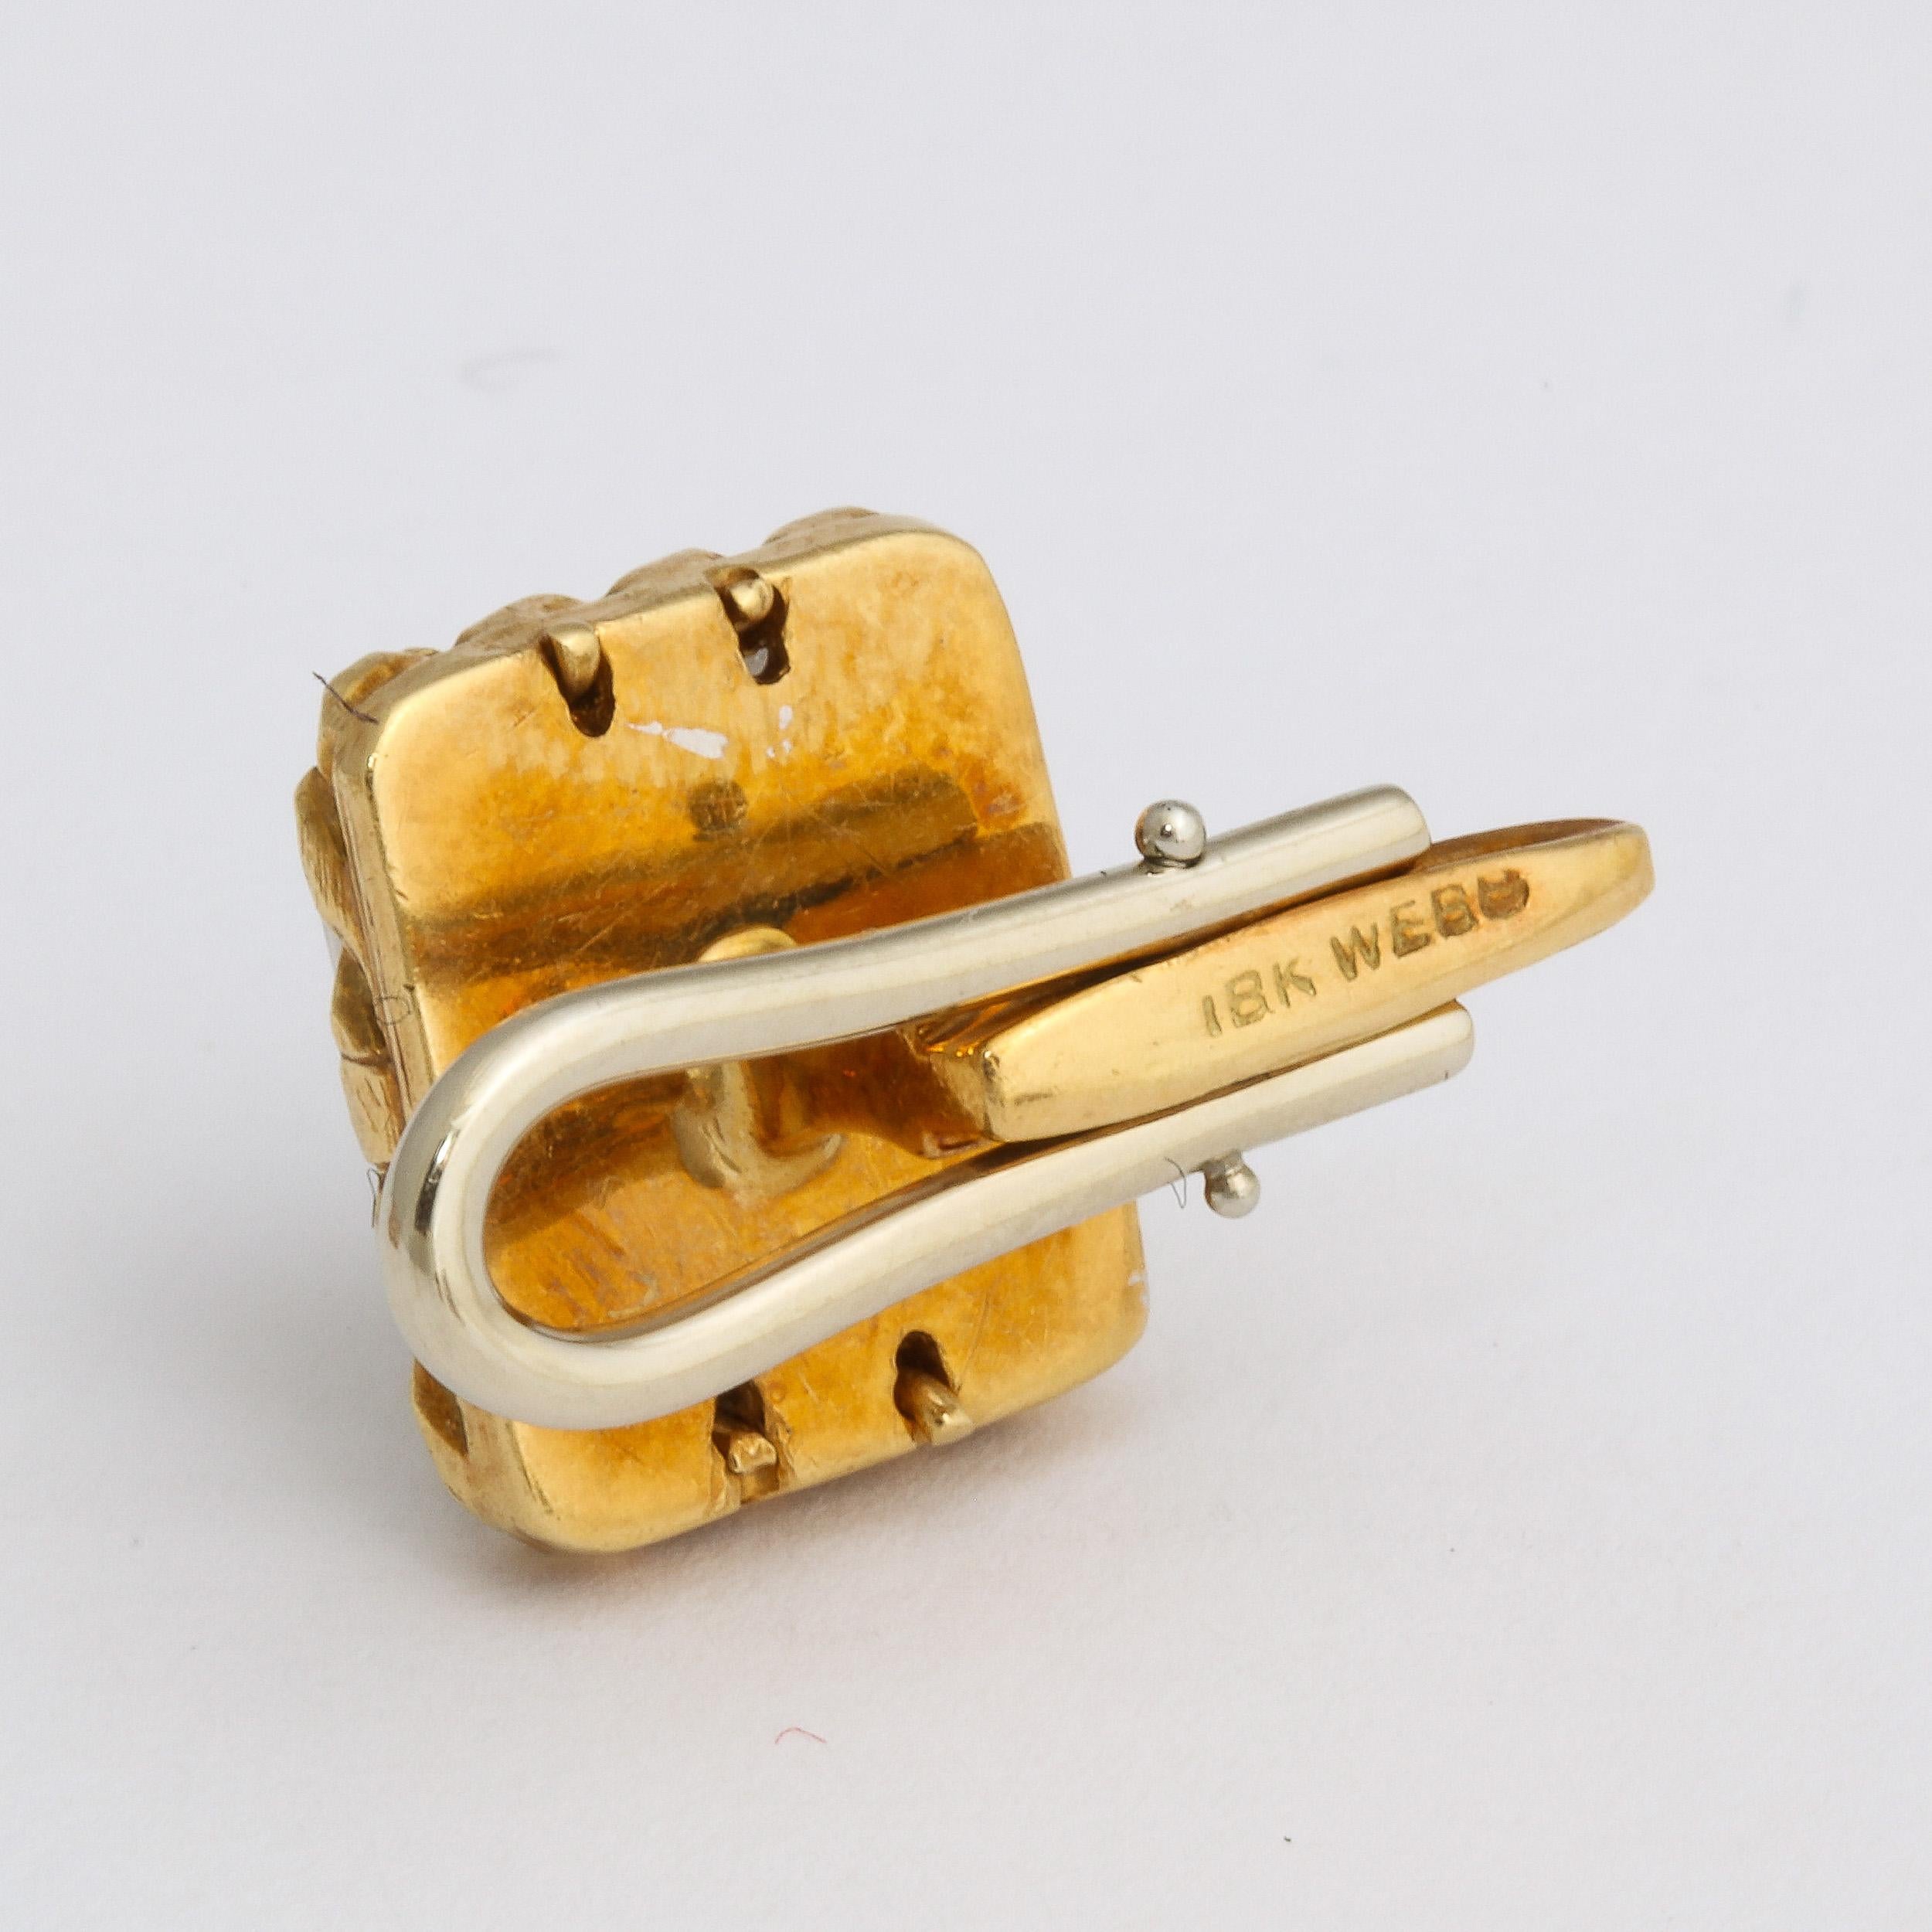 David Webb  18k Yellow Gold & Crystal  6 Piece Cufflink and Stud Set  For Sale 10